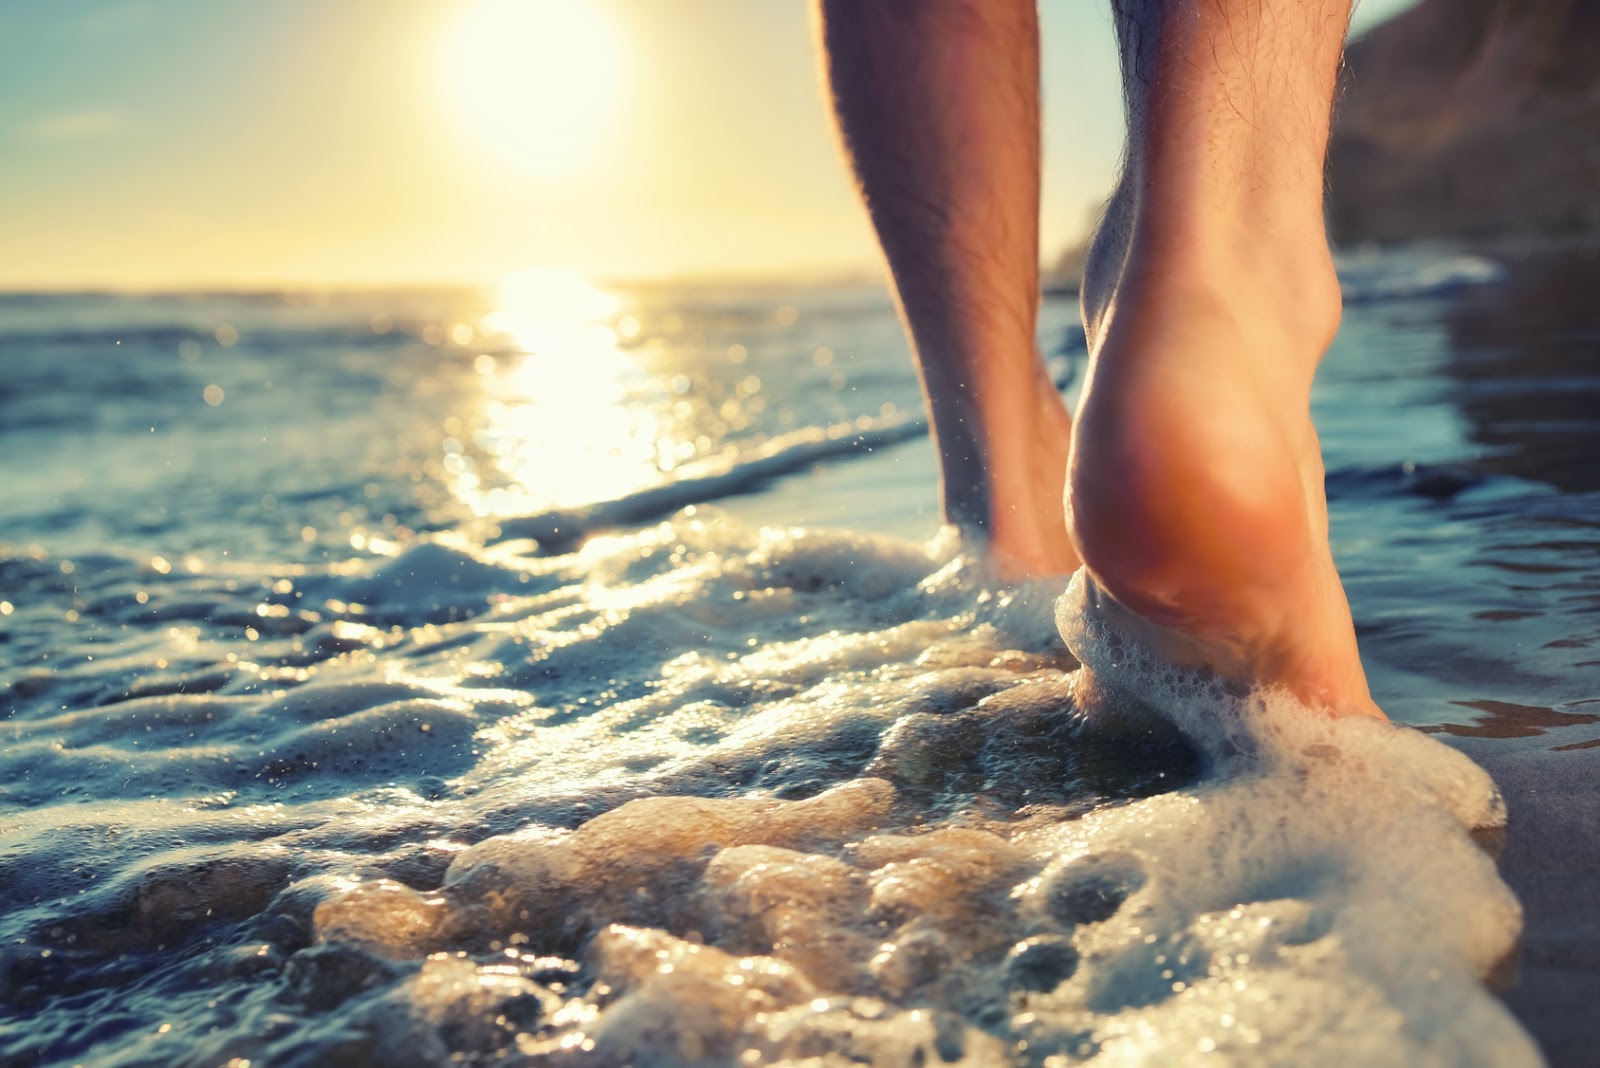 4 Surprising Health Benefits Of Walking Barefoot For 5 Minutes a Day